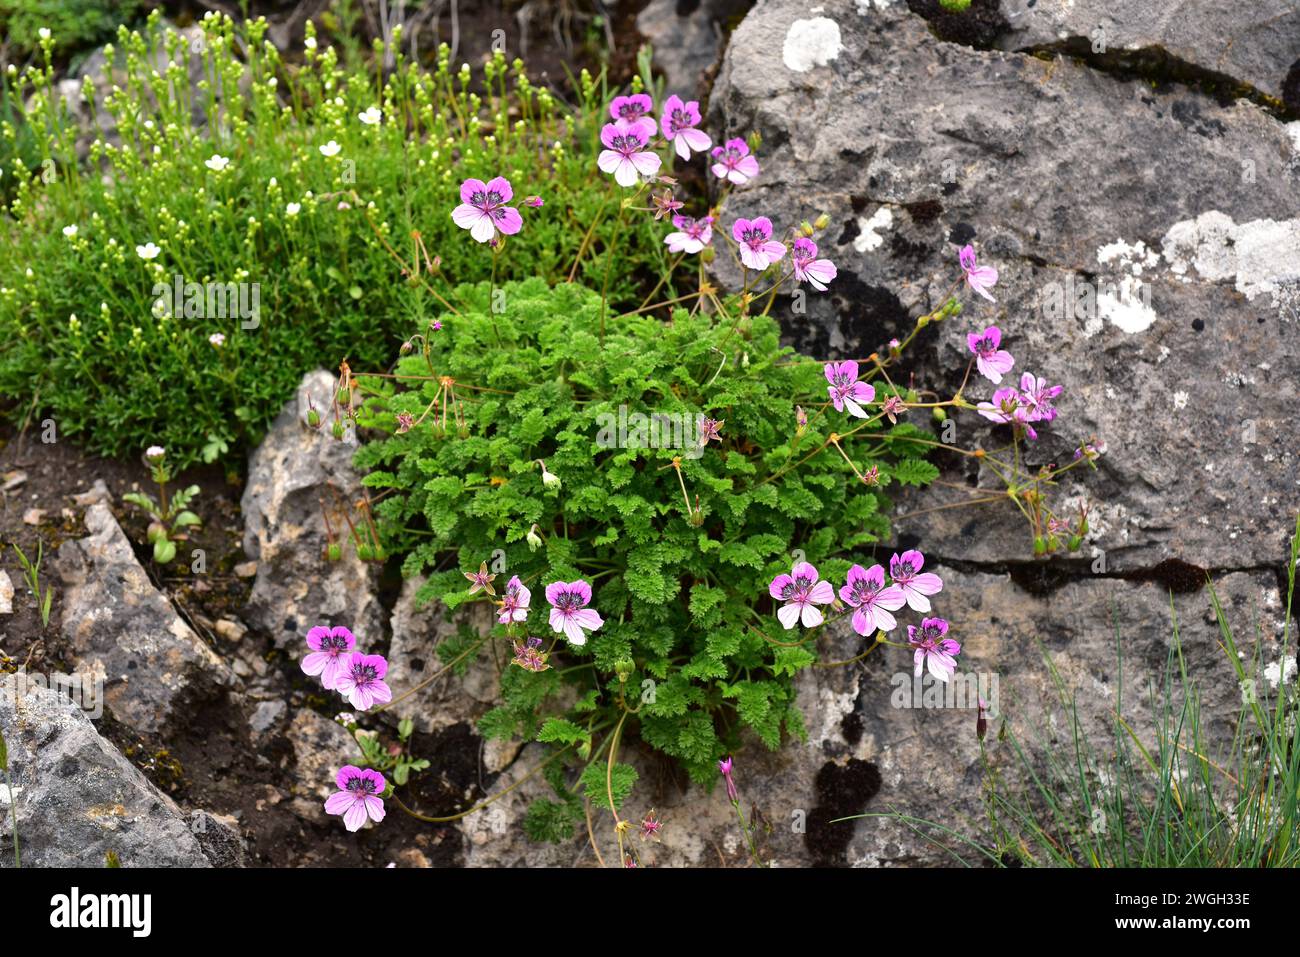 Storksbill (Erodium glandulosum) is a perennial herb endemic to northern Spain (Pyrenees, Cantabrian Mountains). This photo was taken in Babia, Leon p Stock Photo